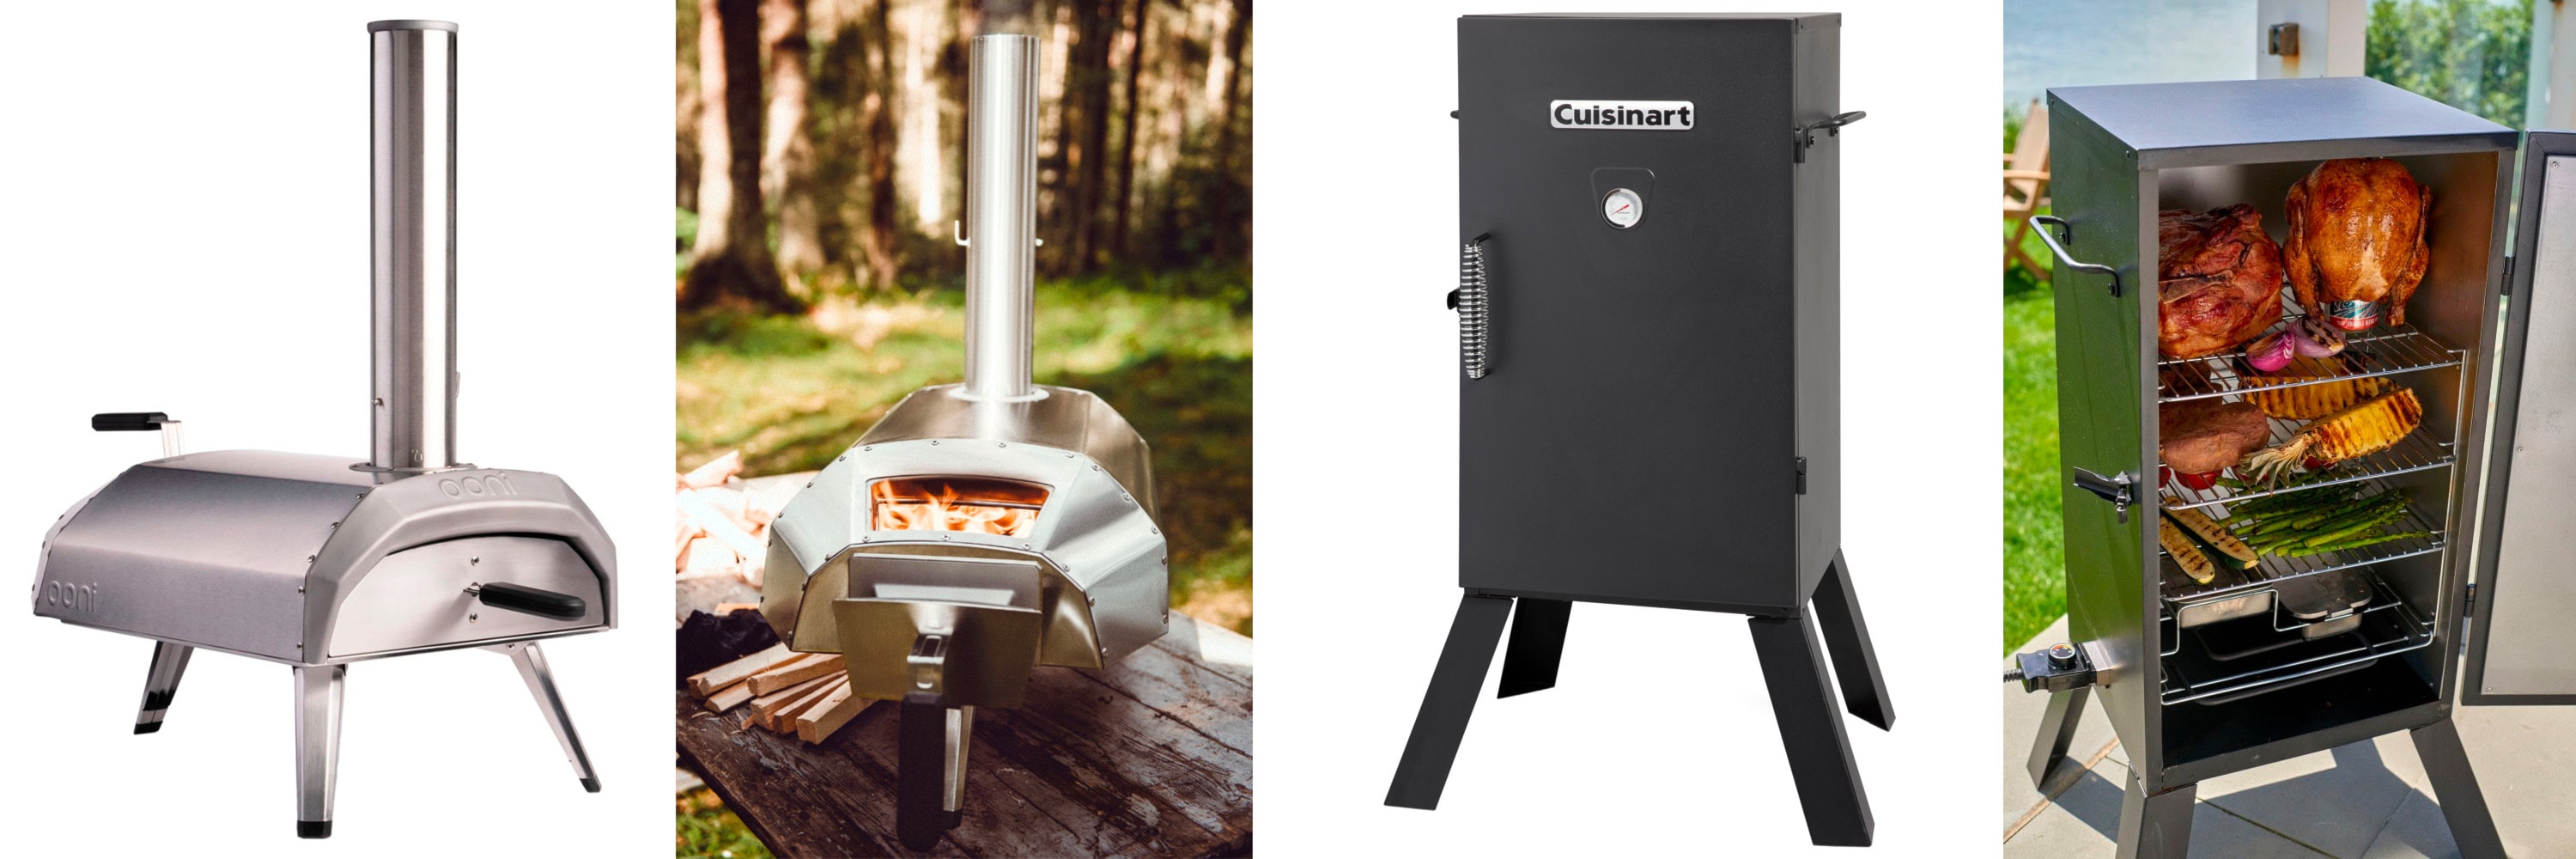 Get a free outdoor pizza oven or smoker with qualifying in stock outdoor furniture purchase $2000 or more